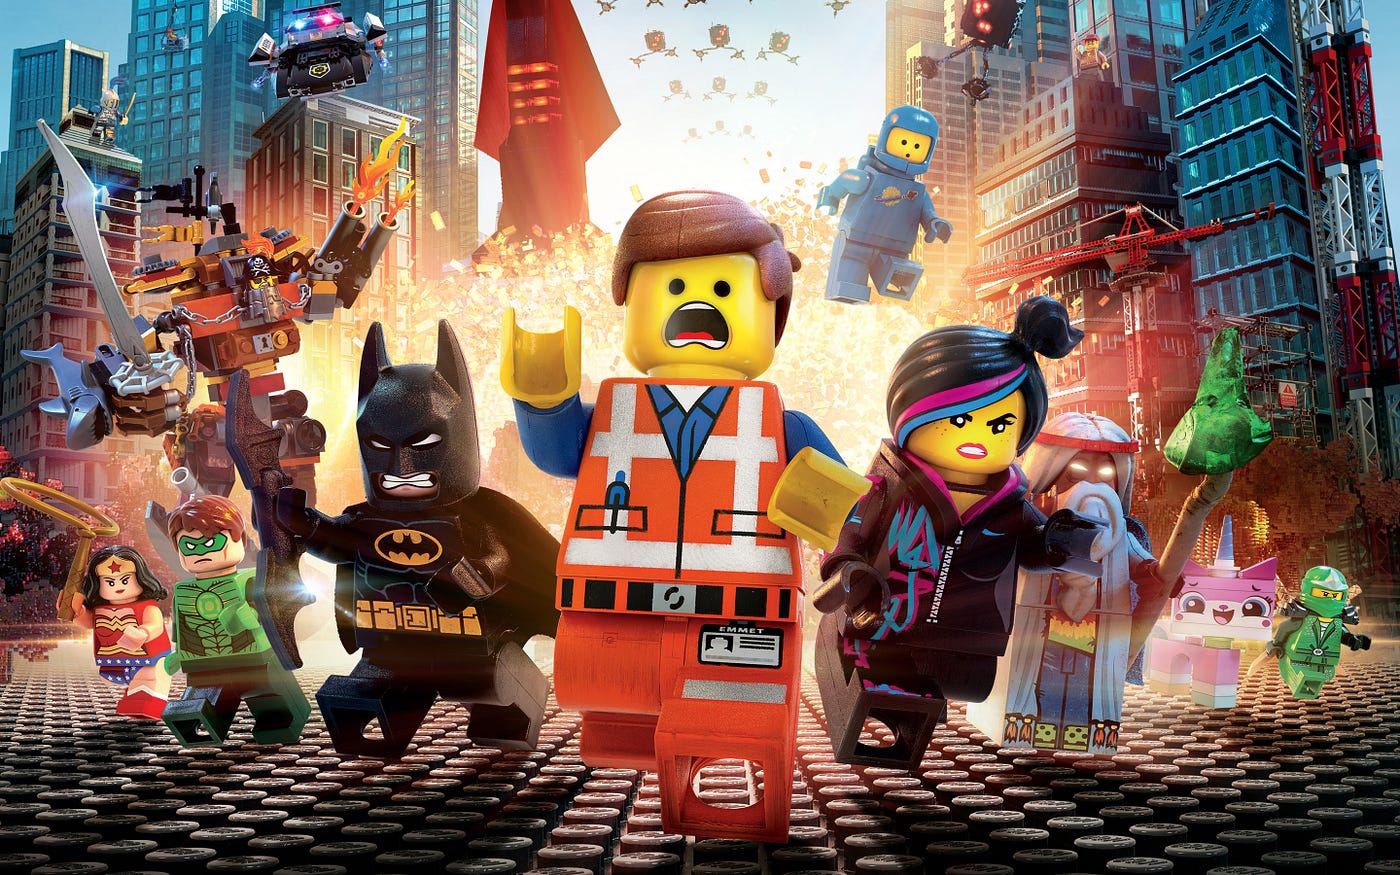 5 Reasons The LEGO Movie Is the Greatest Ever | by Mission | Mission.org | Medium